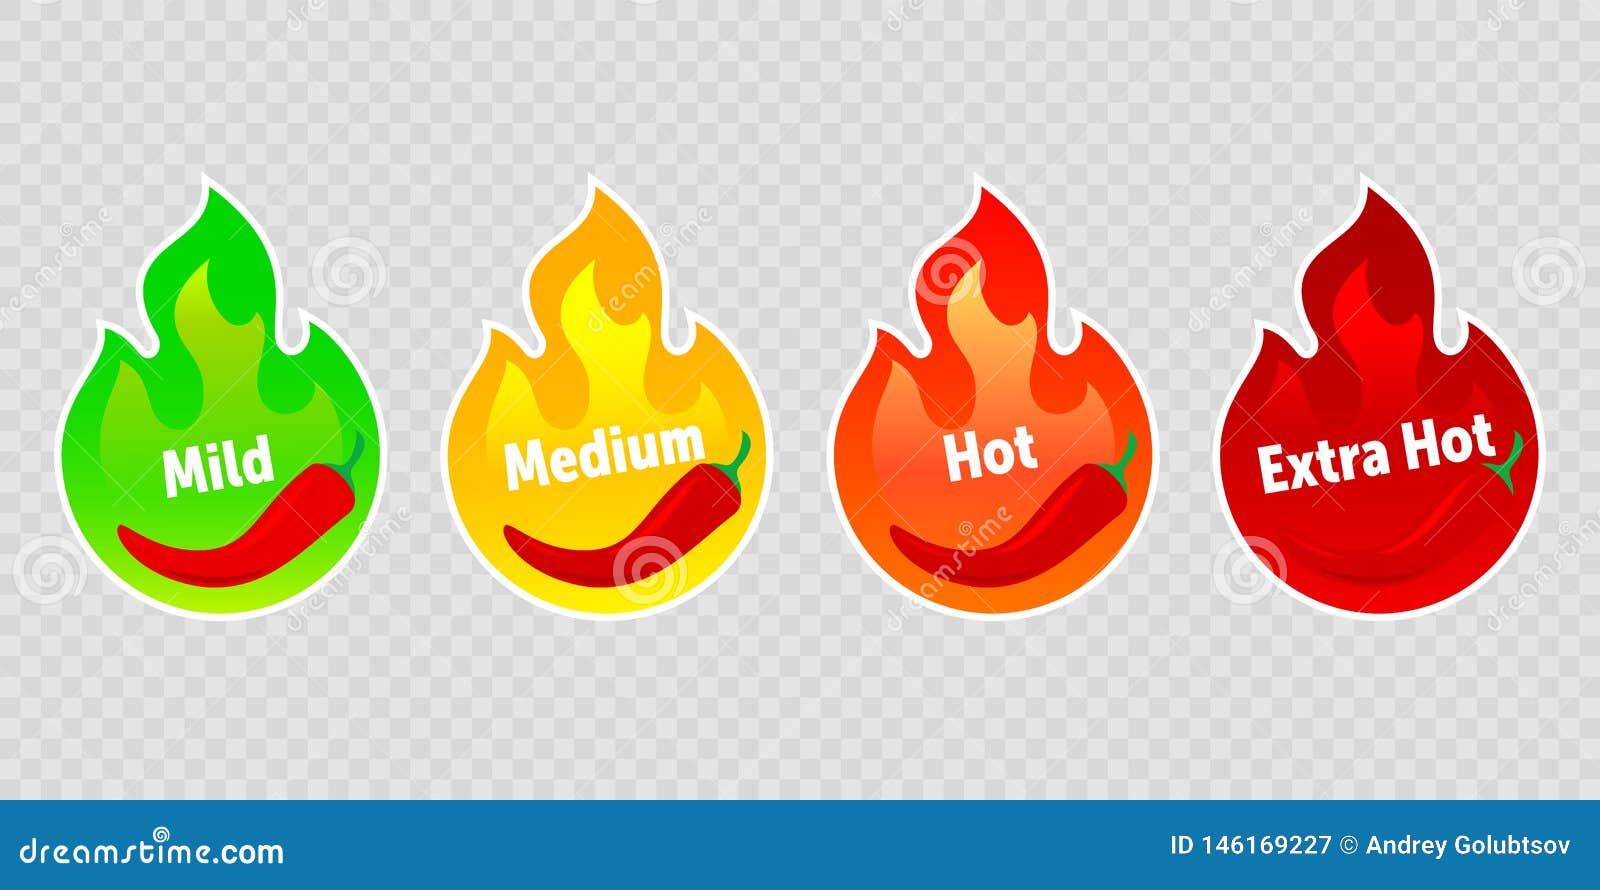 spicy chili pepper hot fire flame labels.  spicy food level icons, green mild, medium and red extra hot jalapeno and tabasco